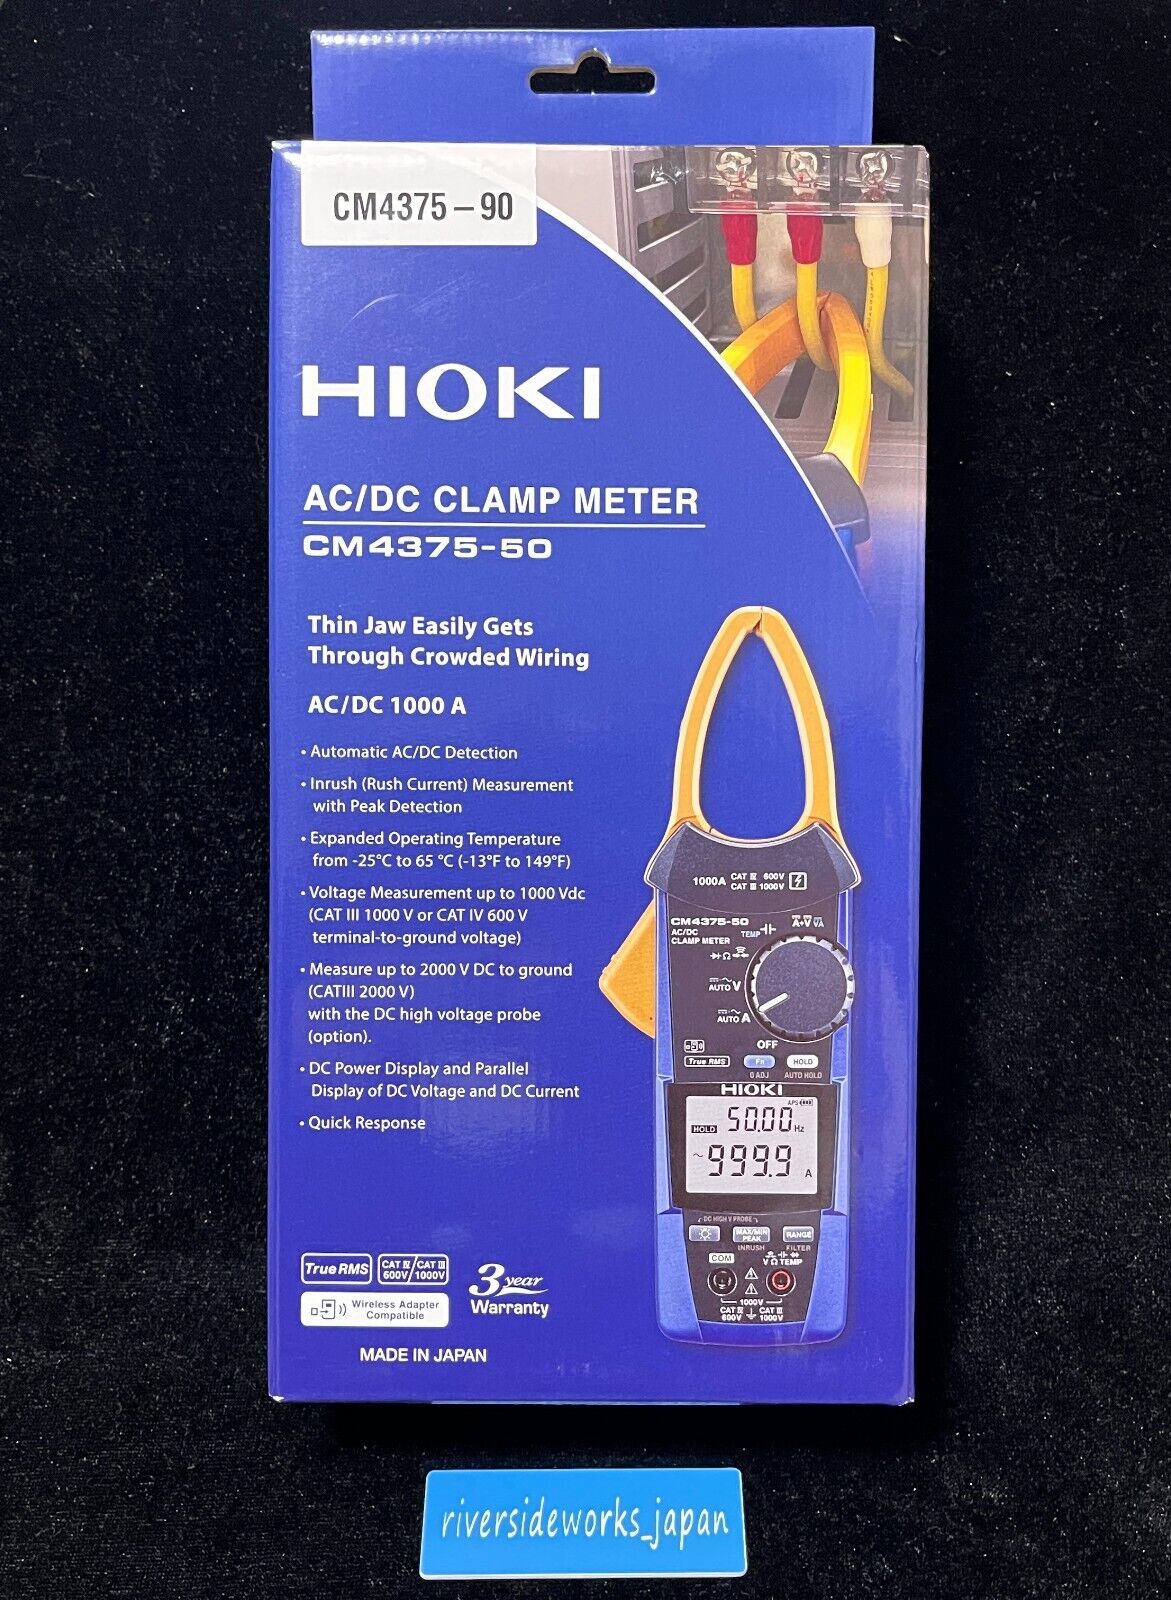 Hioki CM4375-90 True RMS 1000 A AC/DC Clamp Meter with Wireless Adapter Z3210 JP